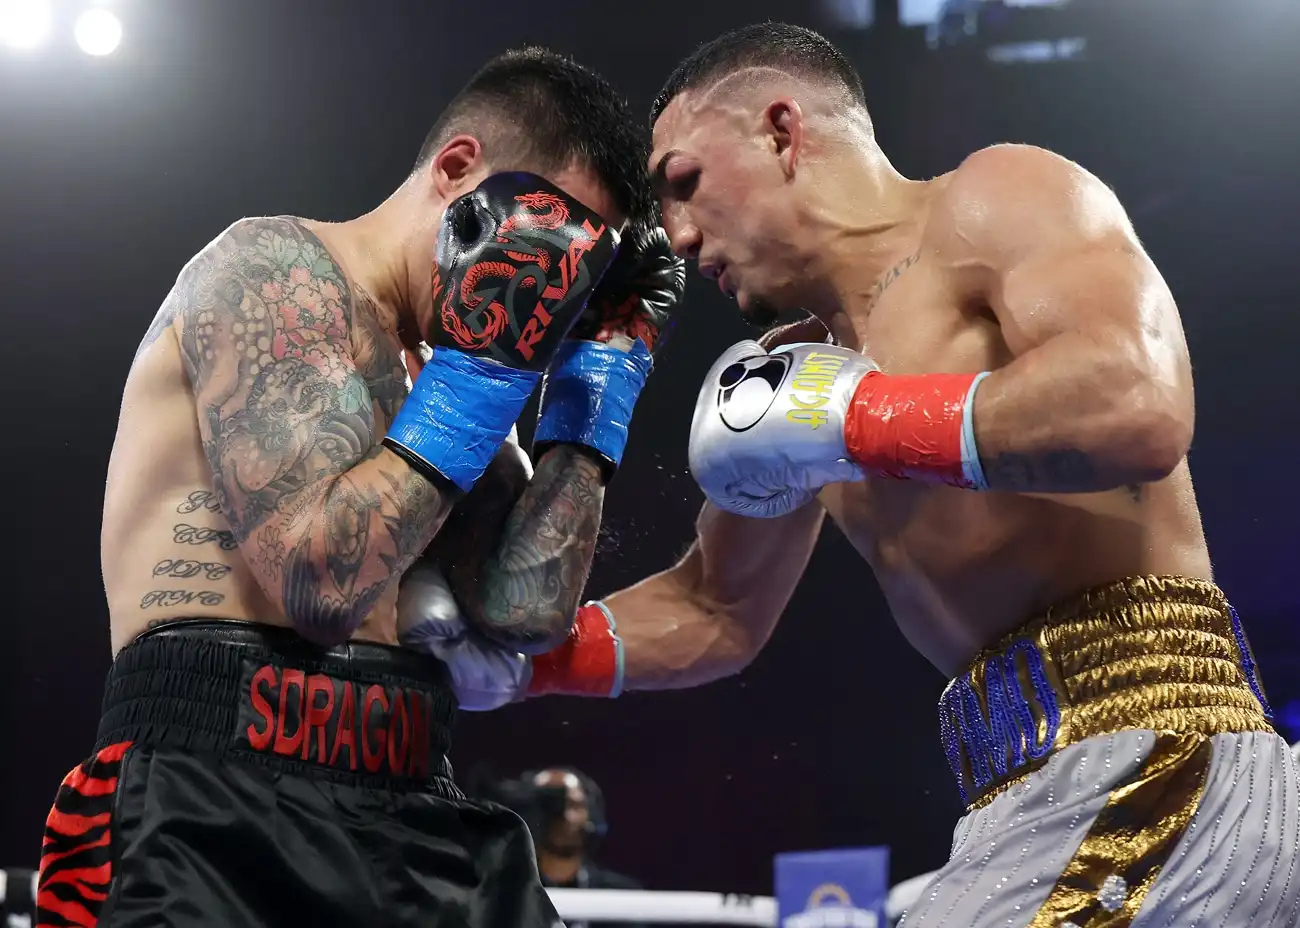 Boxing Results: The Takeover Teofimo Lopez Defeats Steve Claggett - Boxing News 24